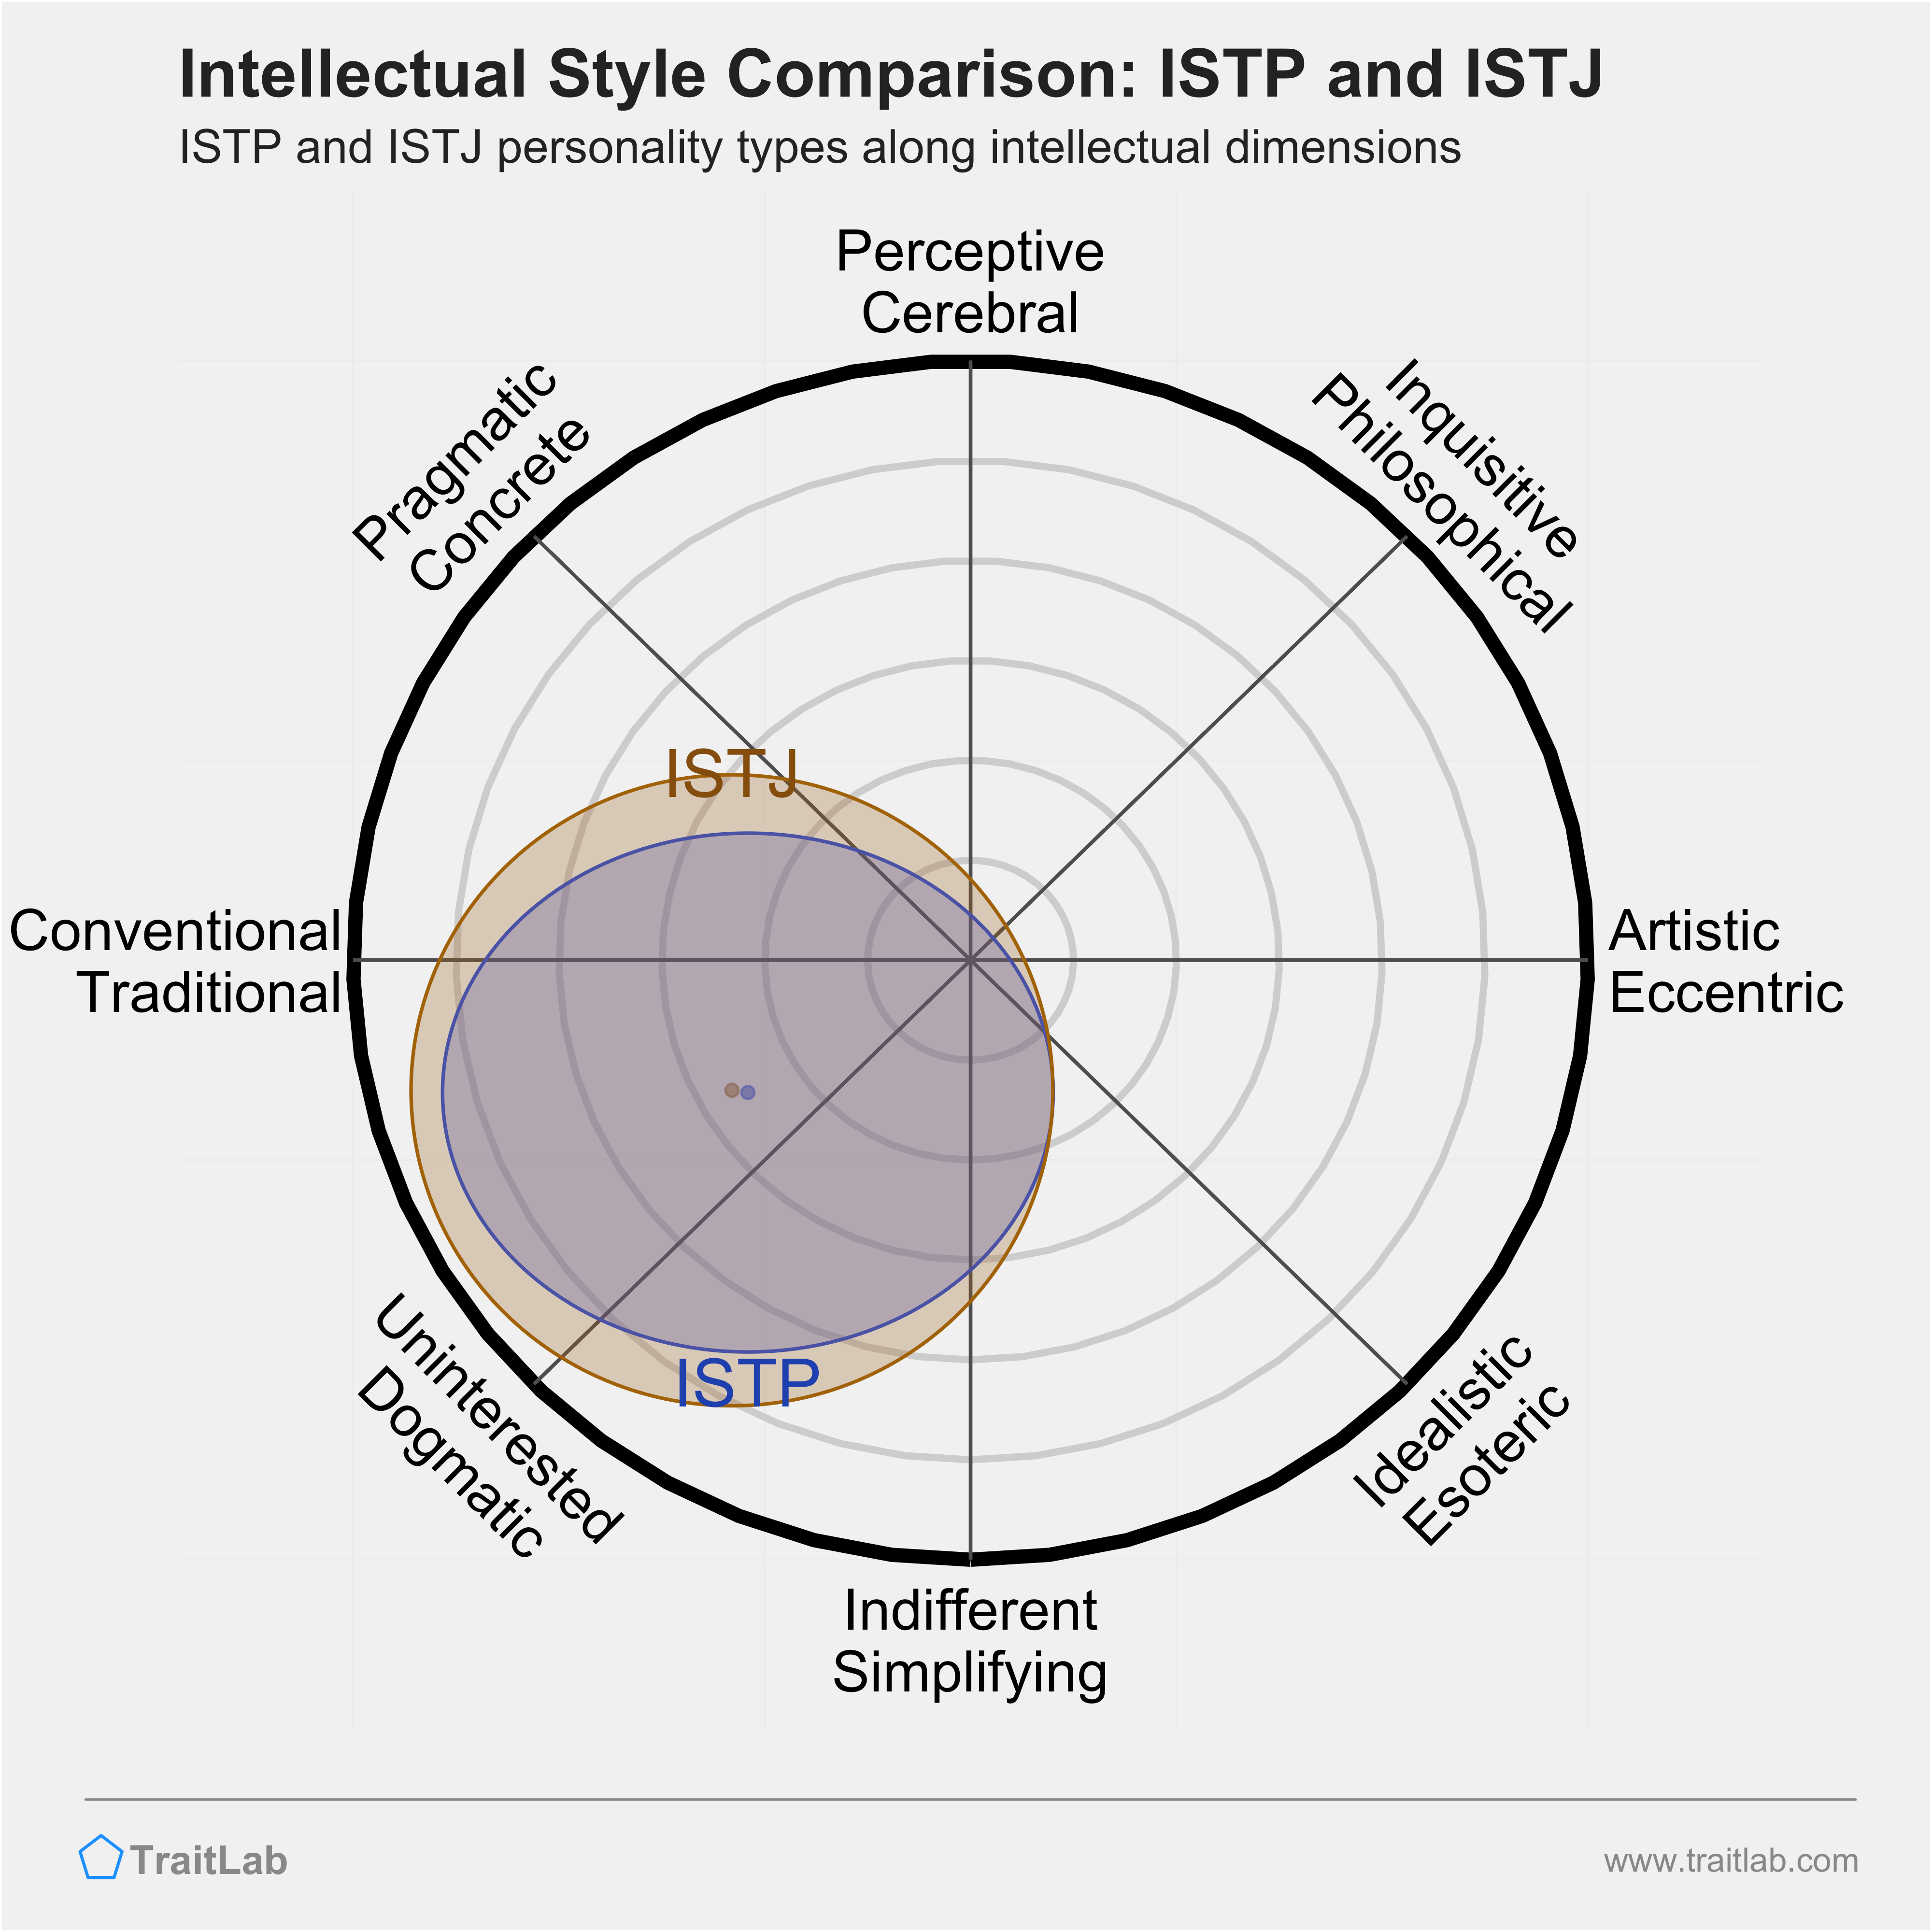 ISTP and ISTJ comparison across intellectual dimensions